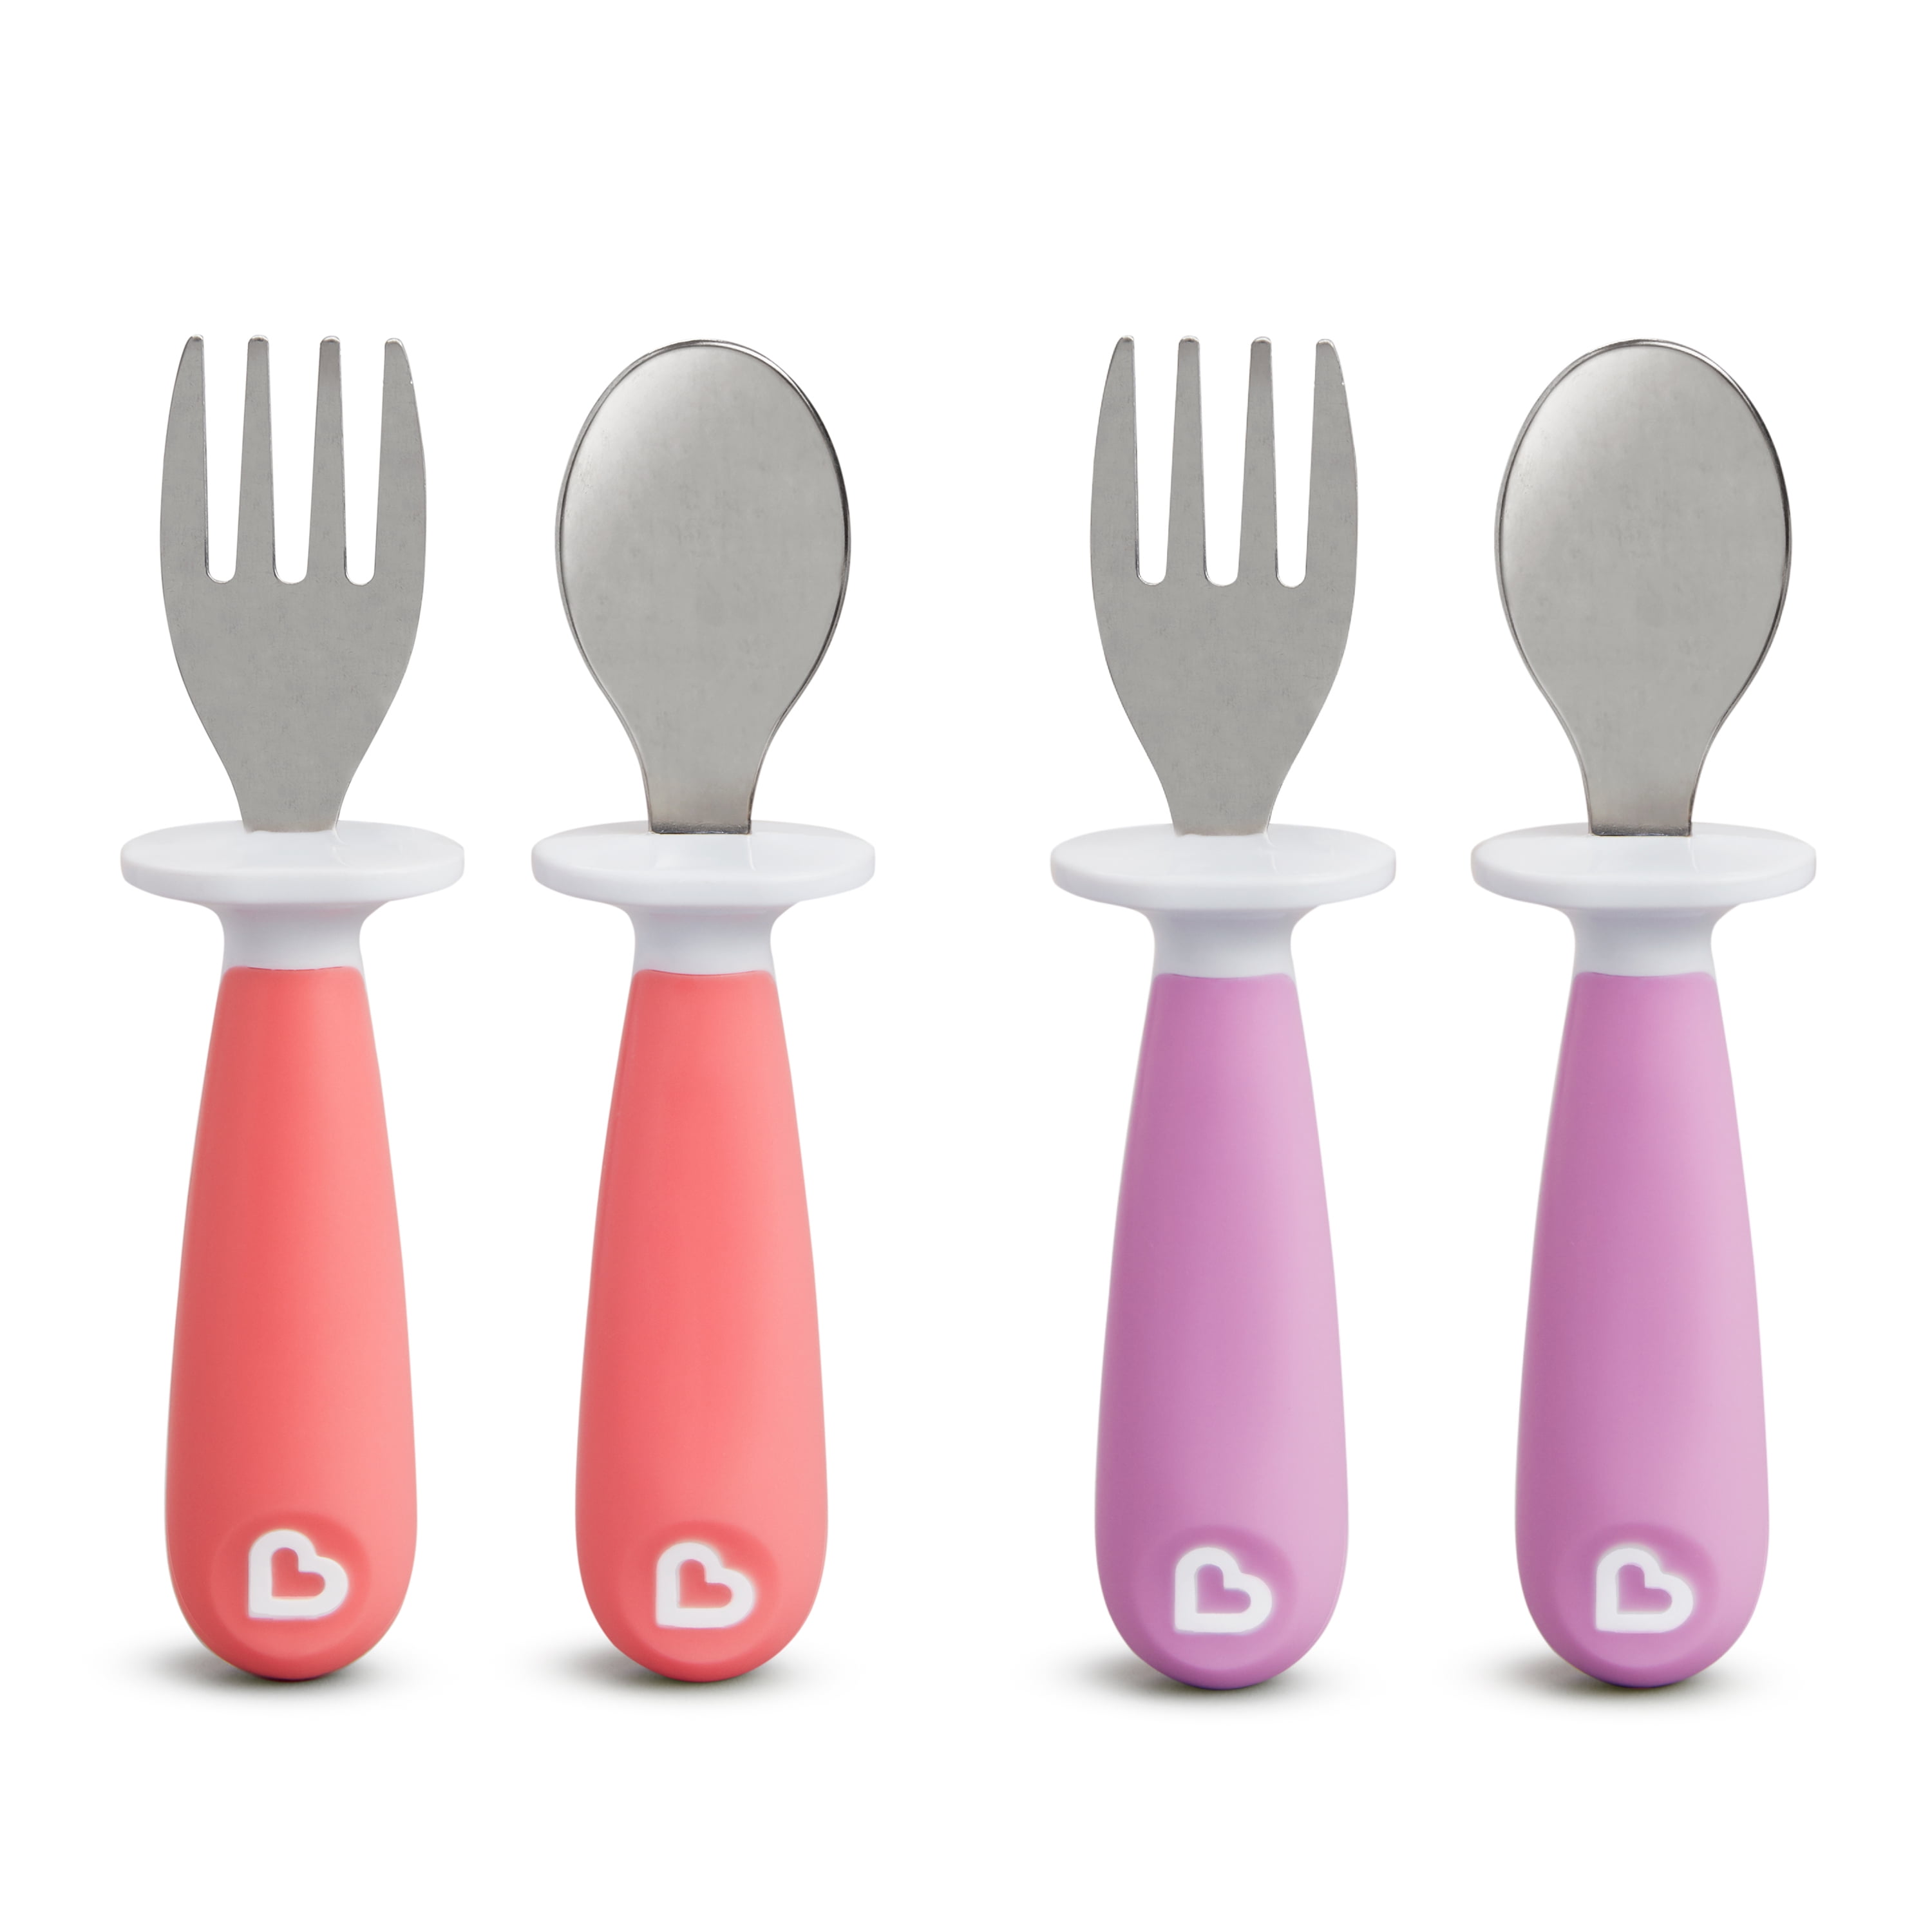  Munchkin® White Hot® Safety Baby Spoons, 4 Pack : Baby